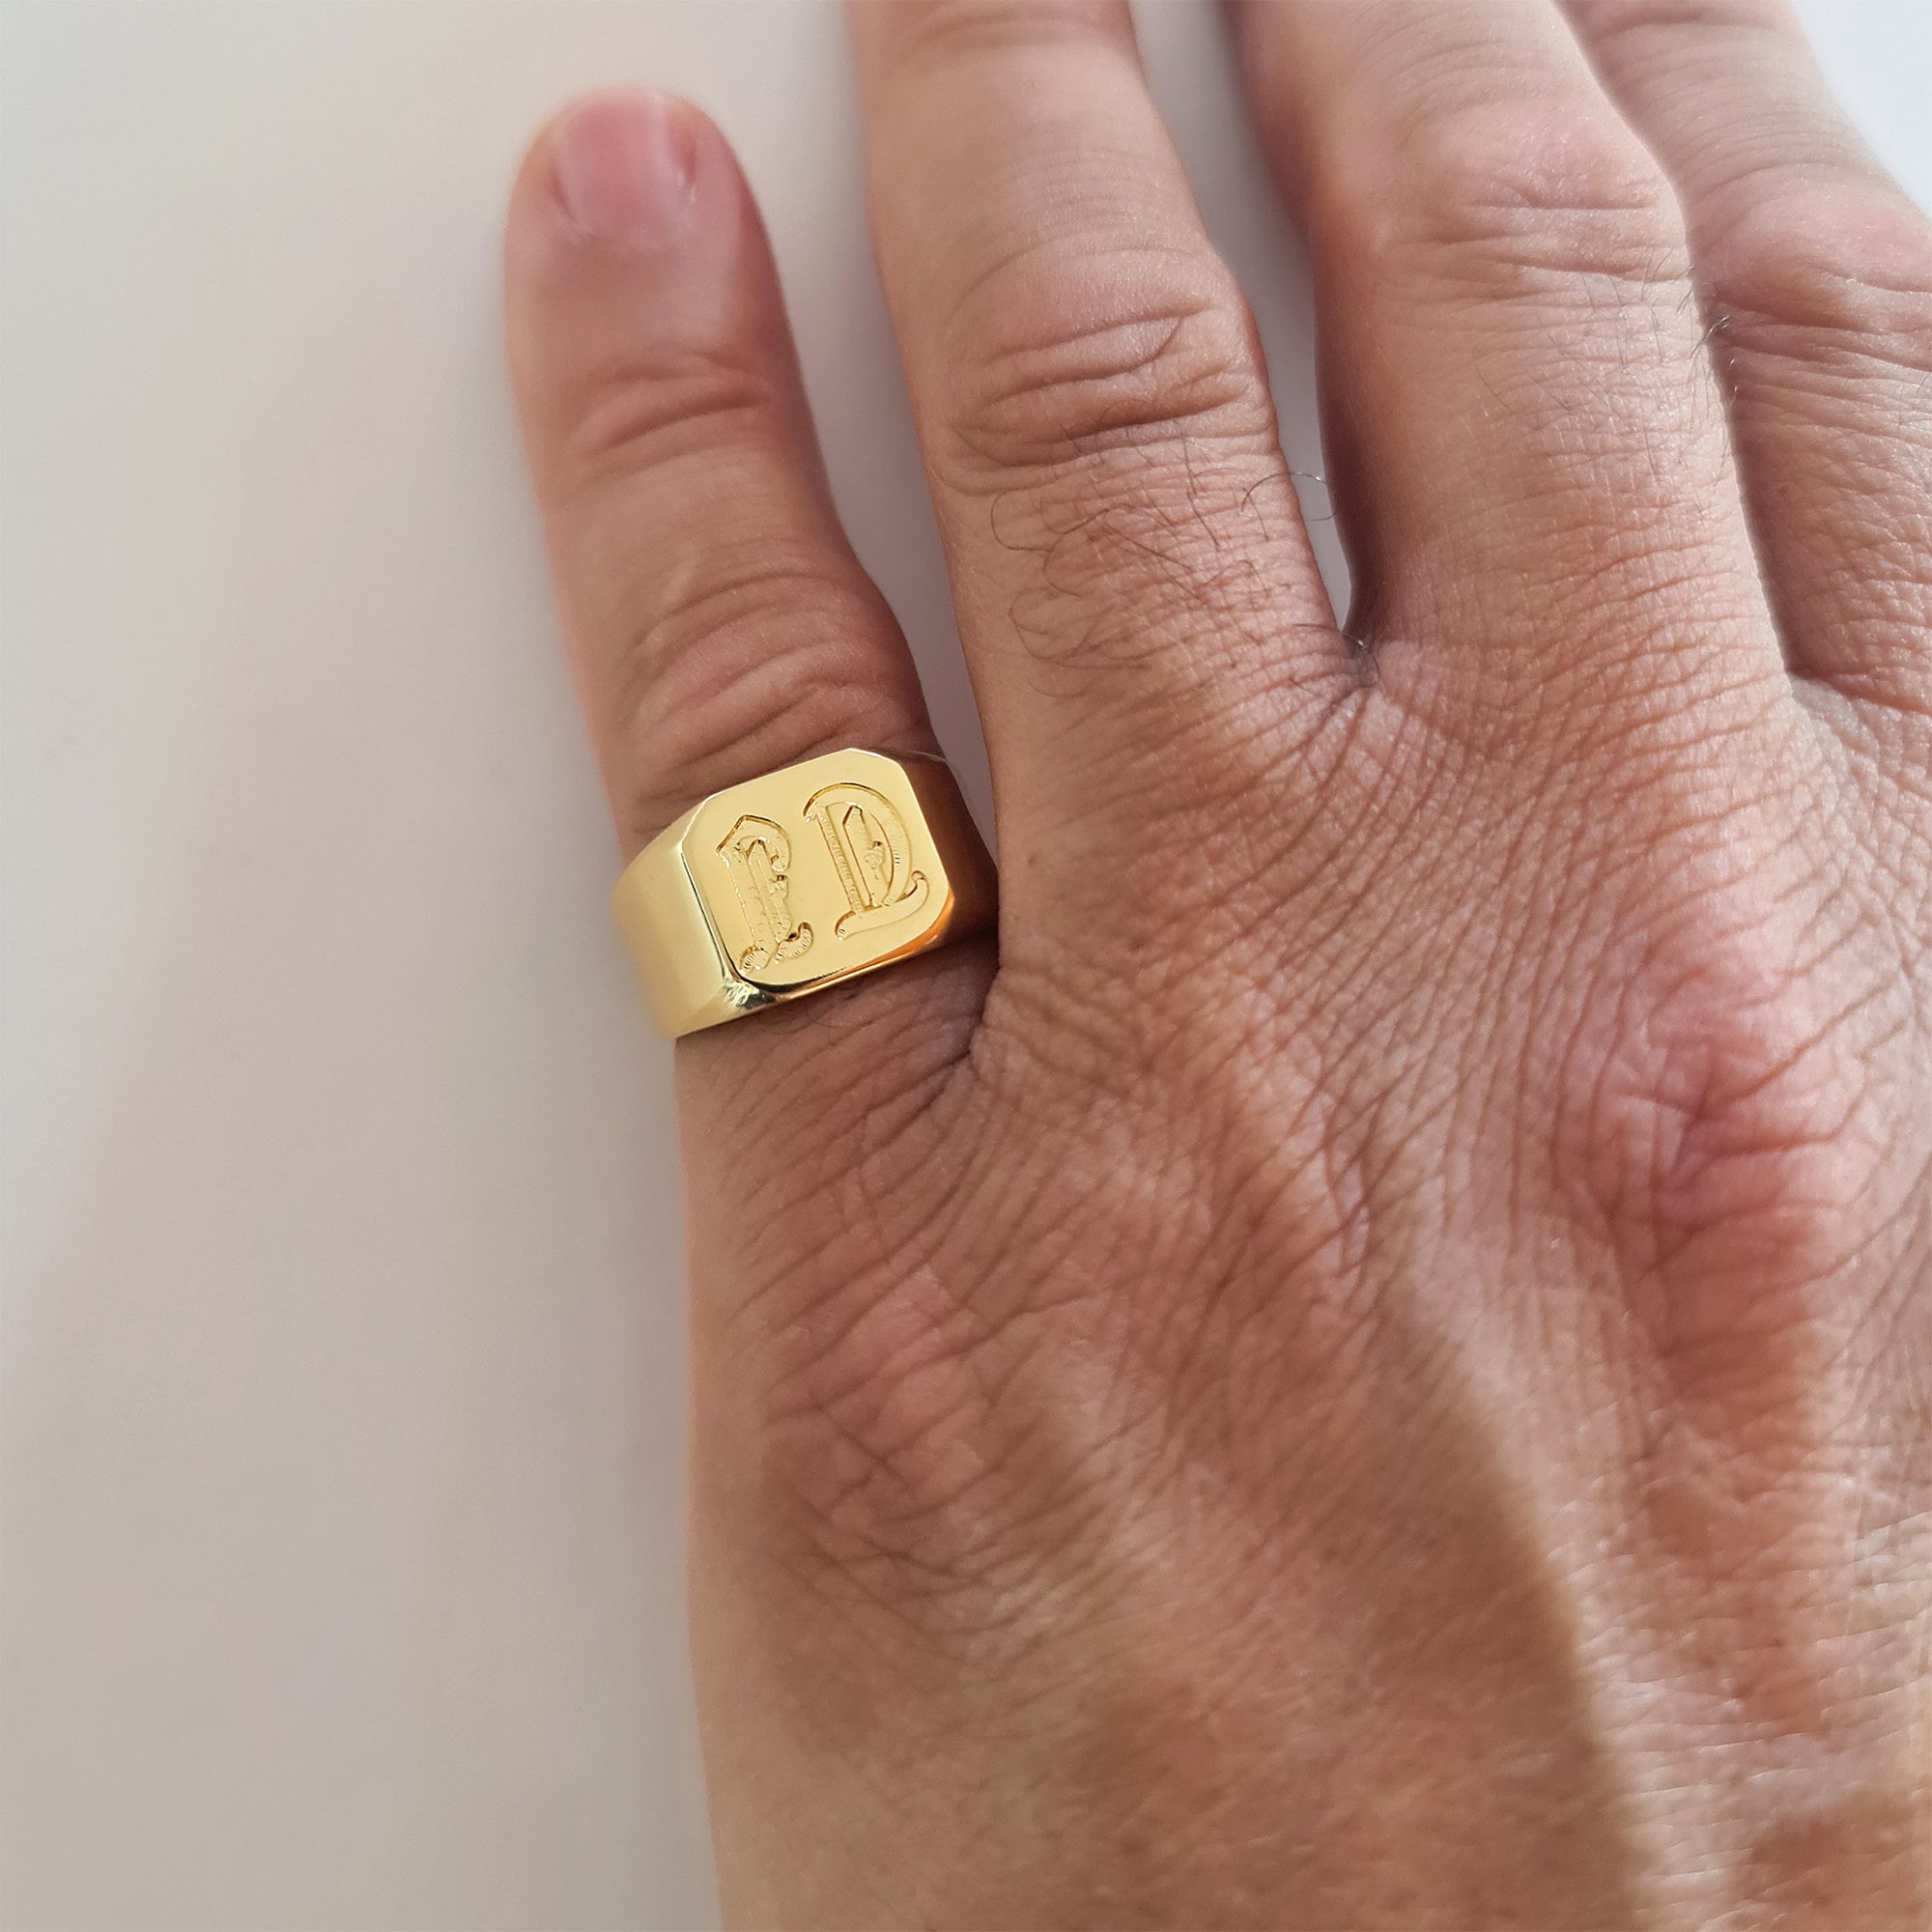 Men's pinky ring engraved with monogrammed initial letters Gold plated  Sterling silver custom signet ring for men Male pinky signet ring